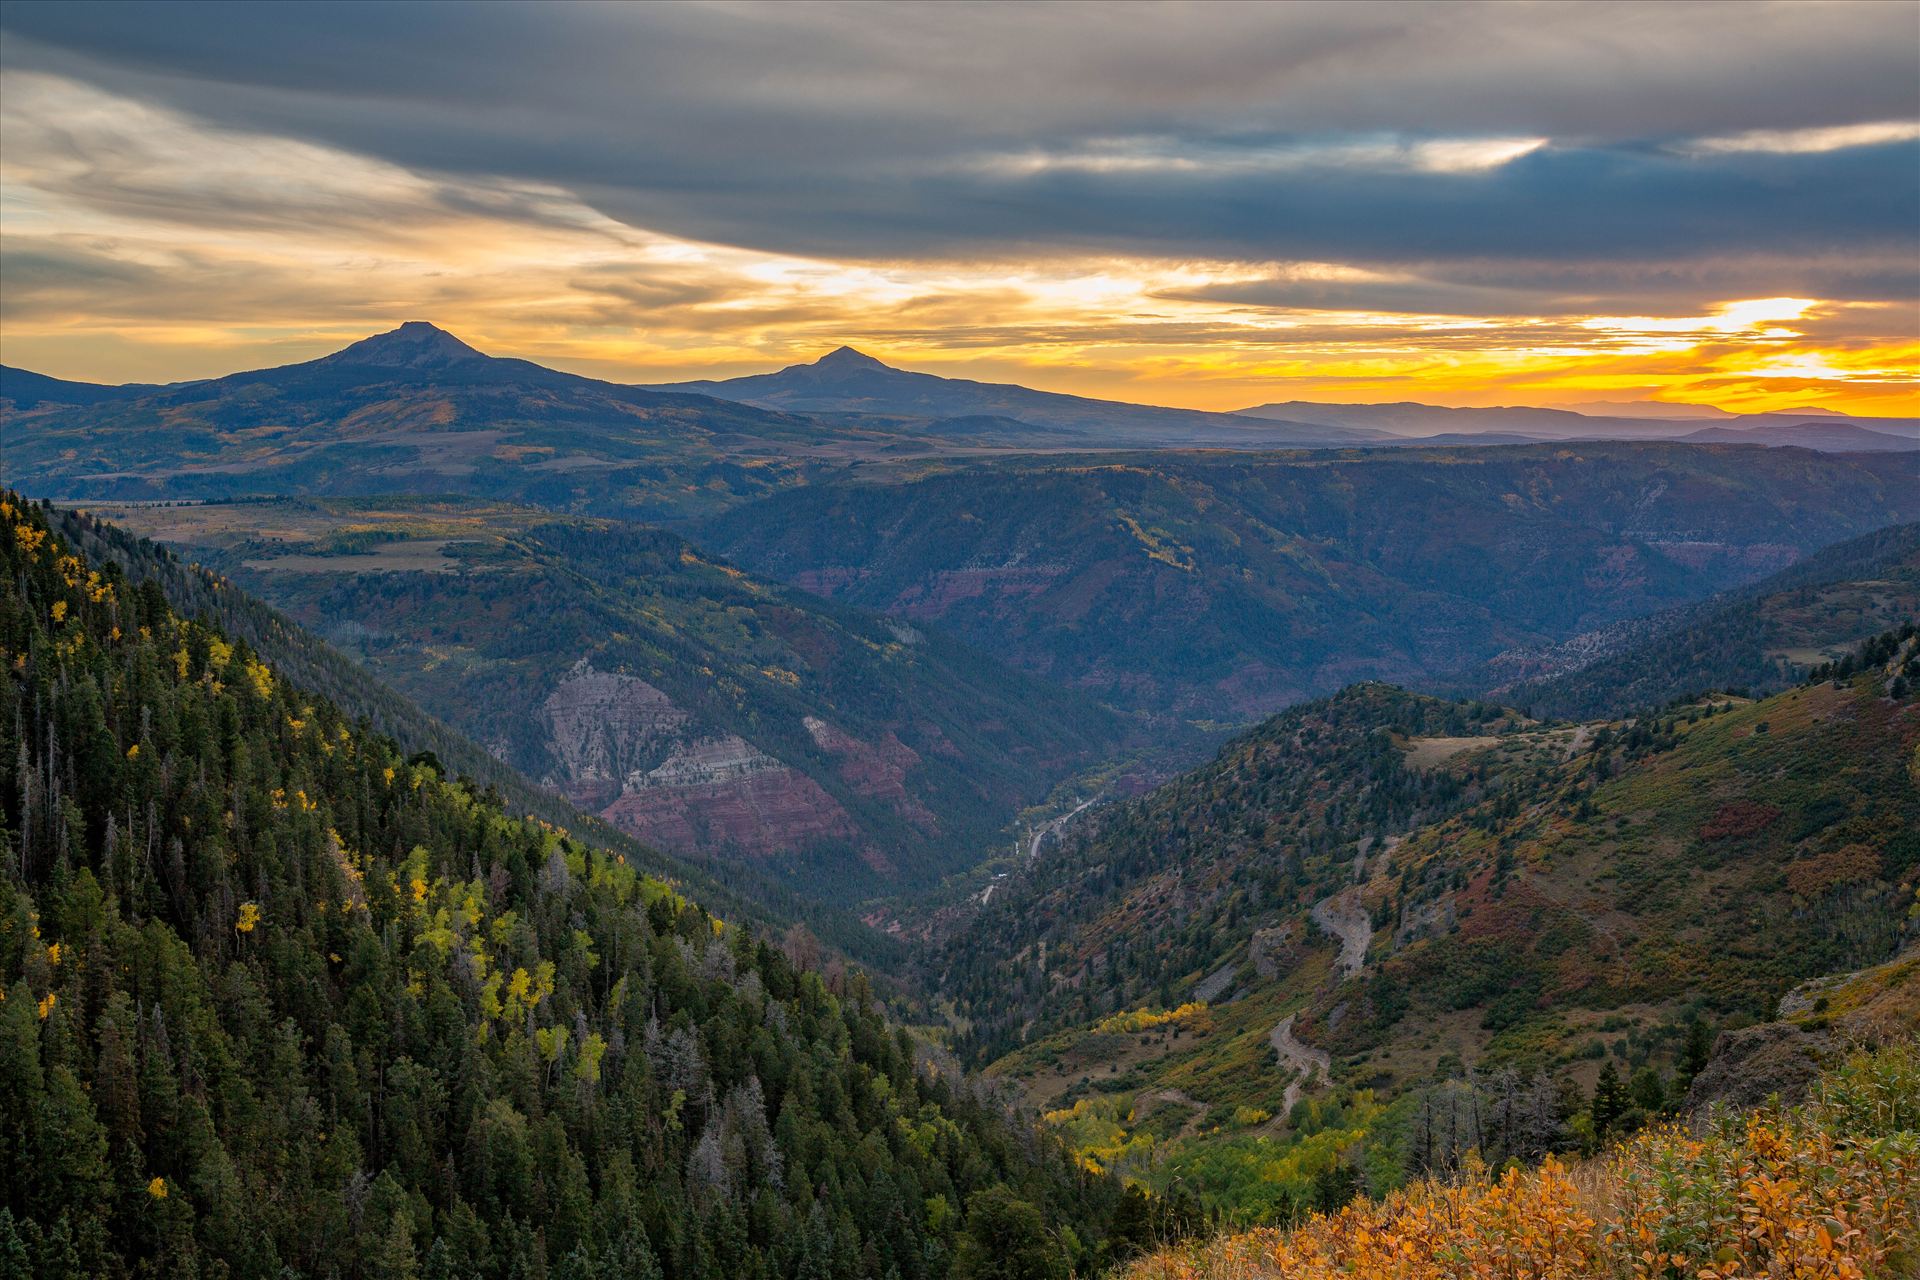 Last Dollar Road Sunset 2 - The sun has almost faded on a quiet, secluded spot from Last Dollar Road, outside of Telluride, Colorado in the fall. by Scott Smith Photos